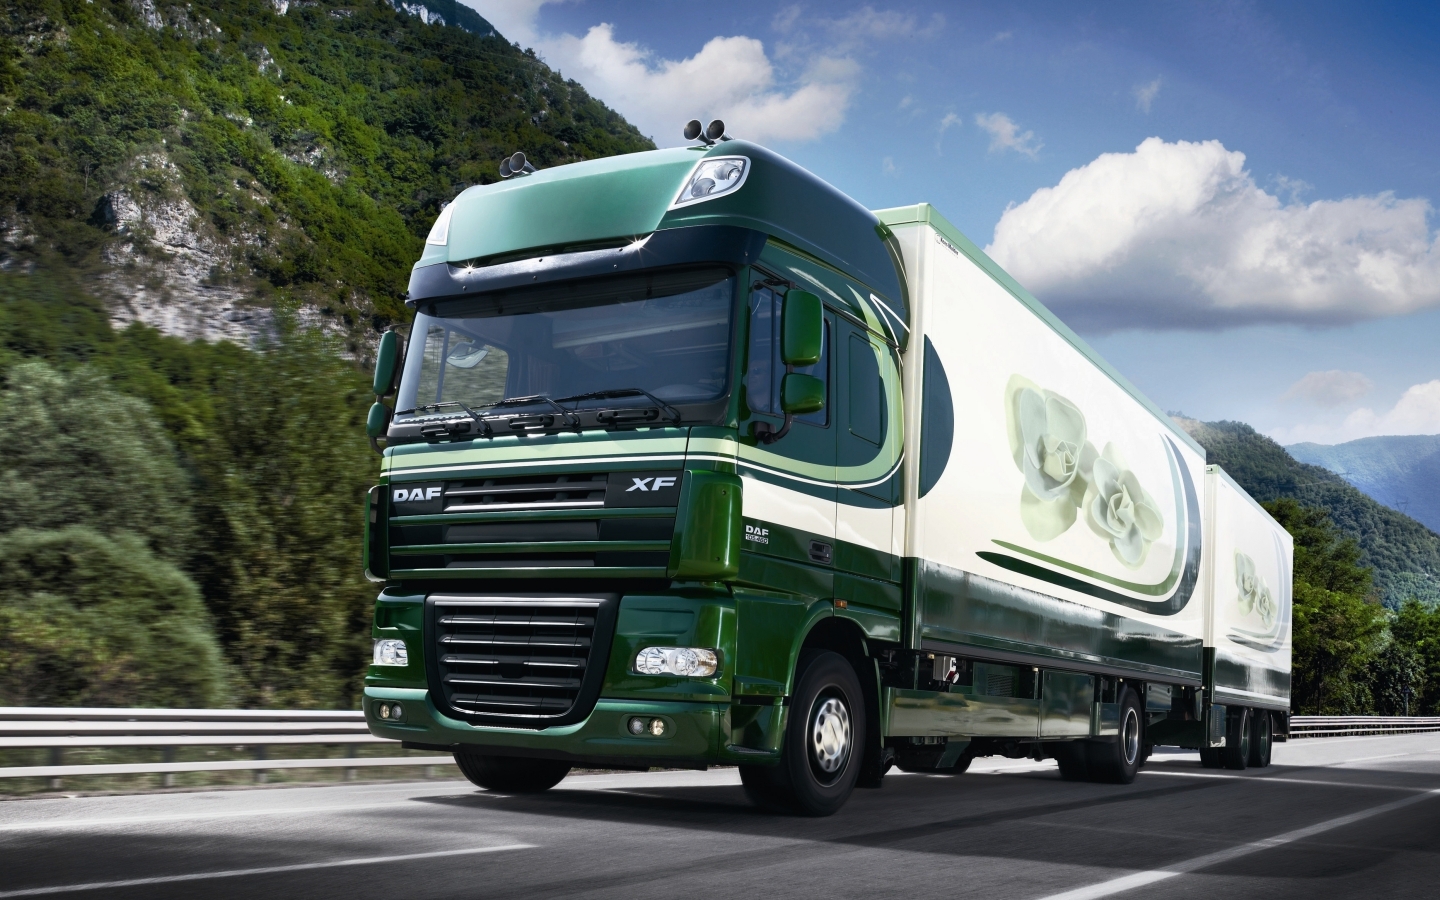 DAF XF 105 Truck for 1440 x 900 widescreen resolution